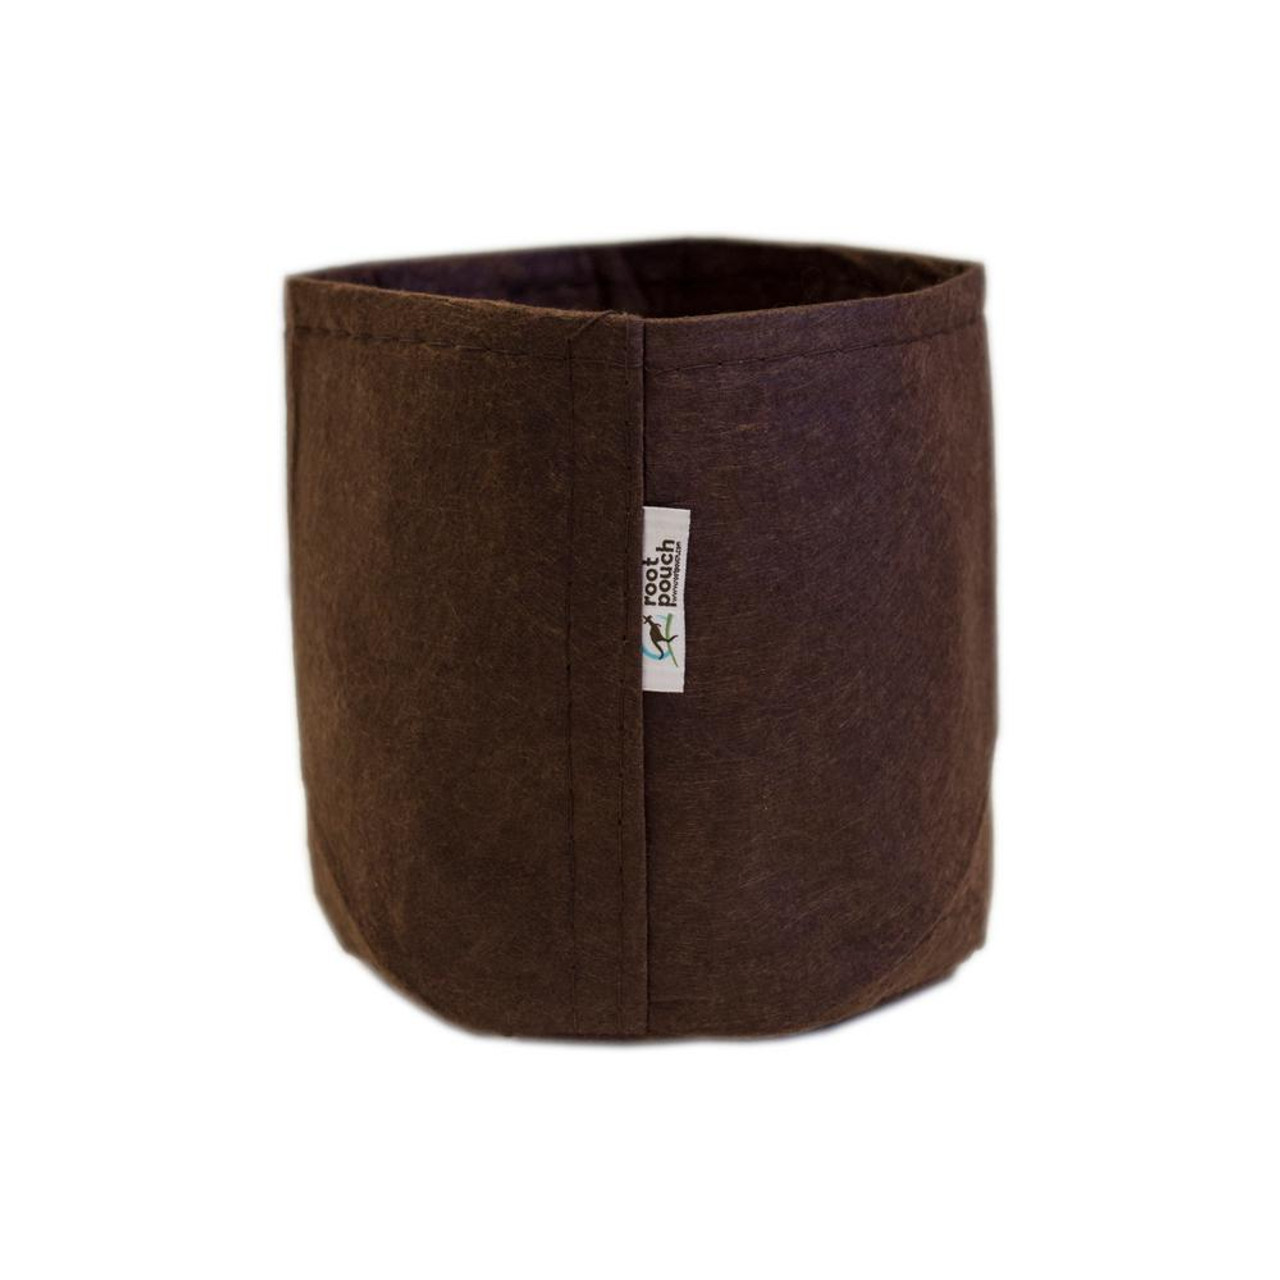 Root Pouch Brown #5 | 11"w x 10 1/4"h